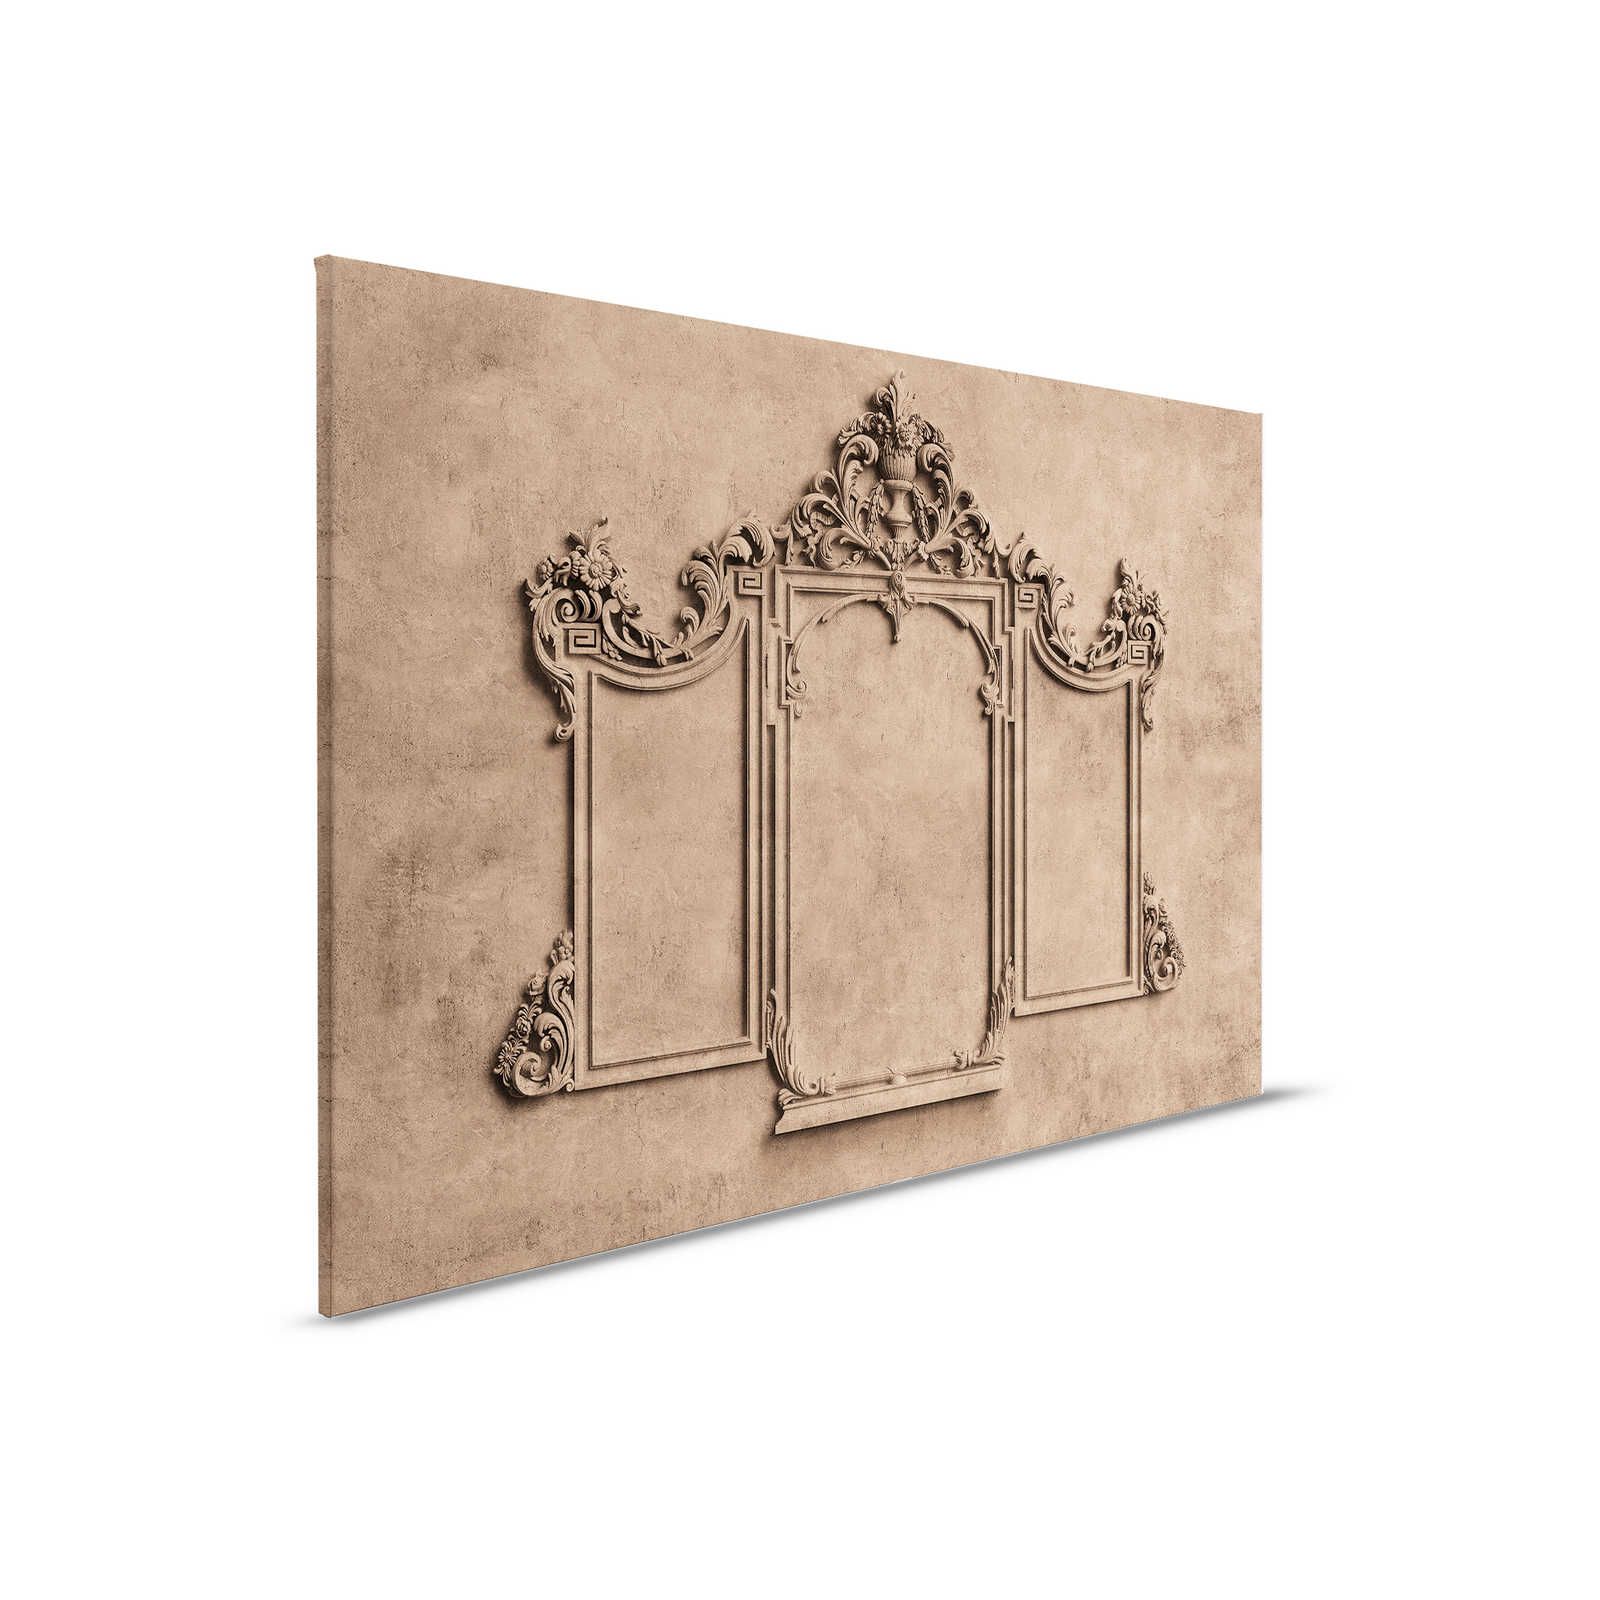 Lyon 1 - Canvas painting 3D stucco frame & plaster look in brown - 0.90 m x 0.60 m
